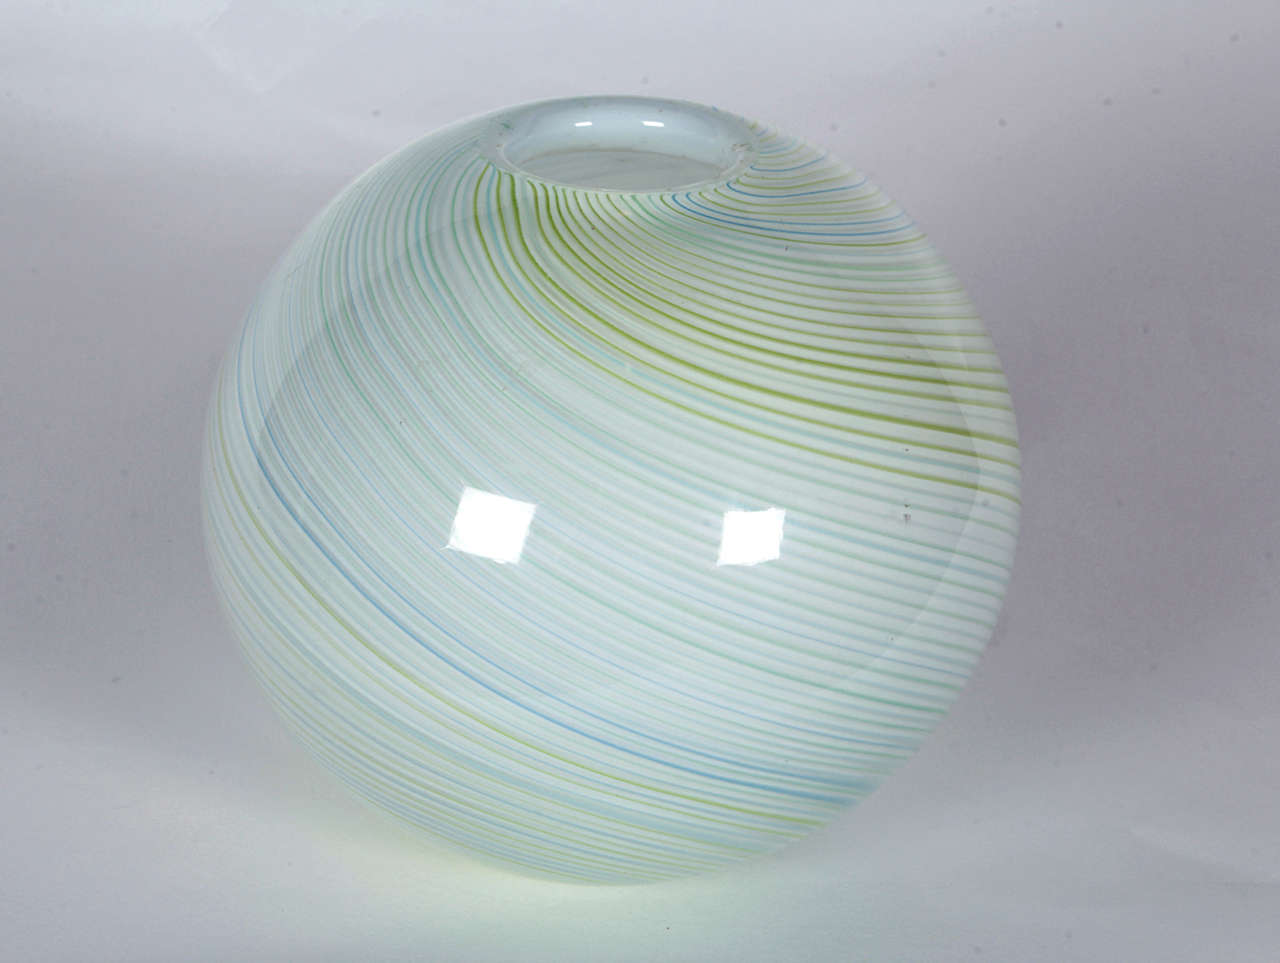 Spherical mezza filigrana vase attributed to Carlo Scarpa, VENINI, Murano. Designed in 1934, executed 1946-65.  Features a multi-color swirl pattern on white.

Item may be viewed at our showroom (see display case) in the New York Design Center.